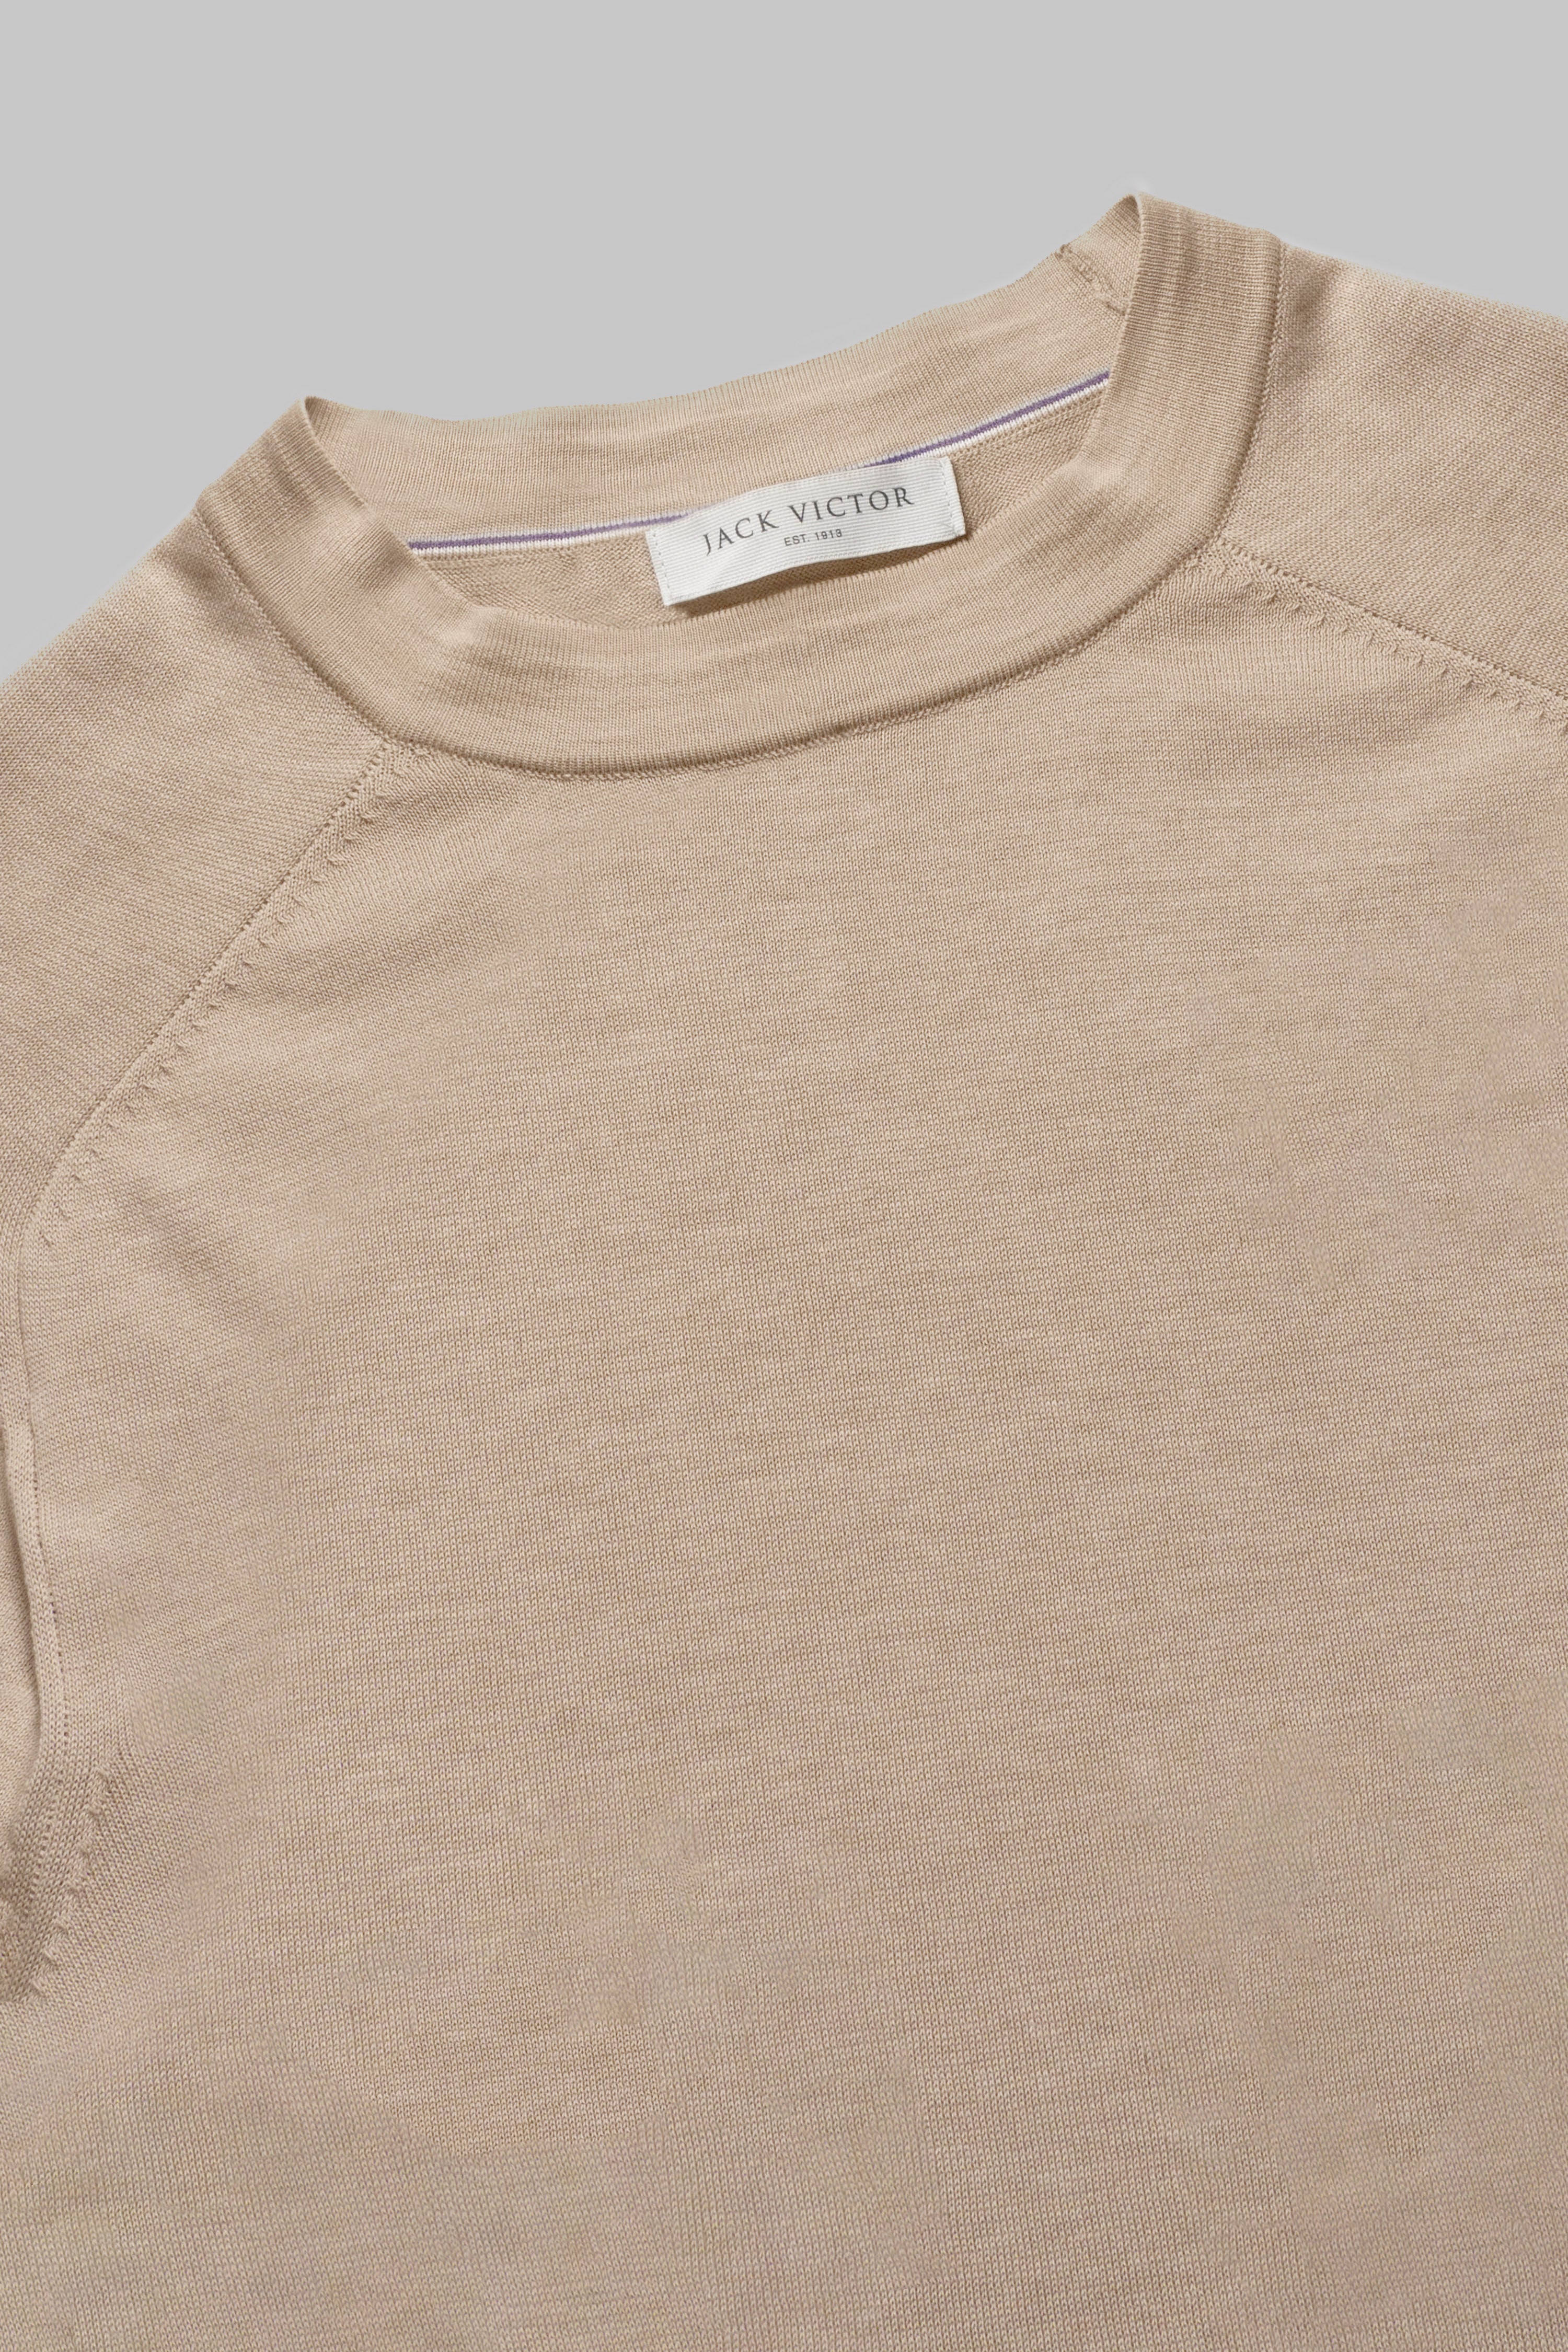 Image of SetiCo Cotton and Silk Knit Crew Neck in Tan-Jack Victor